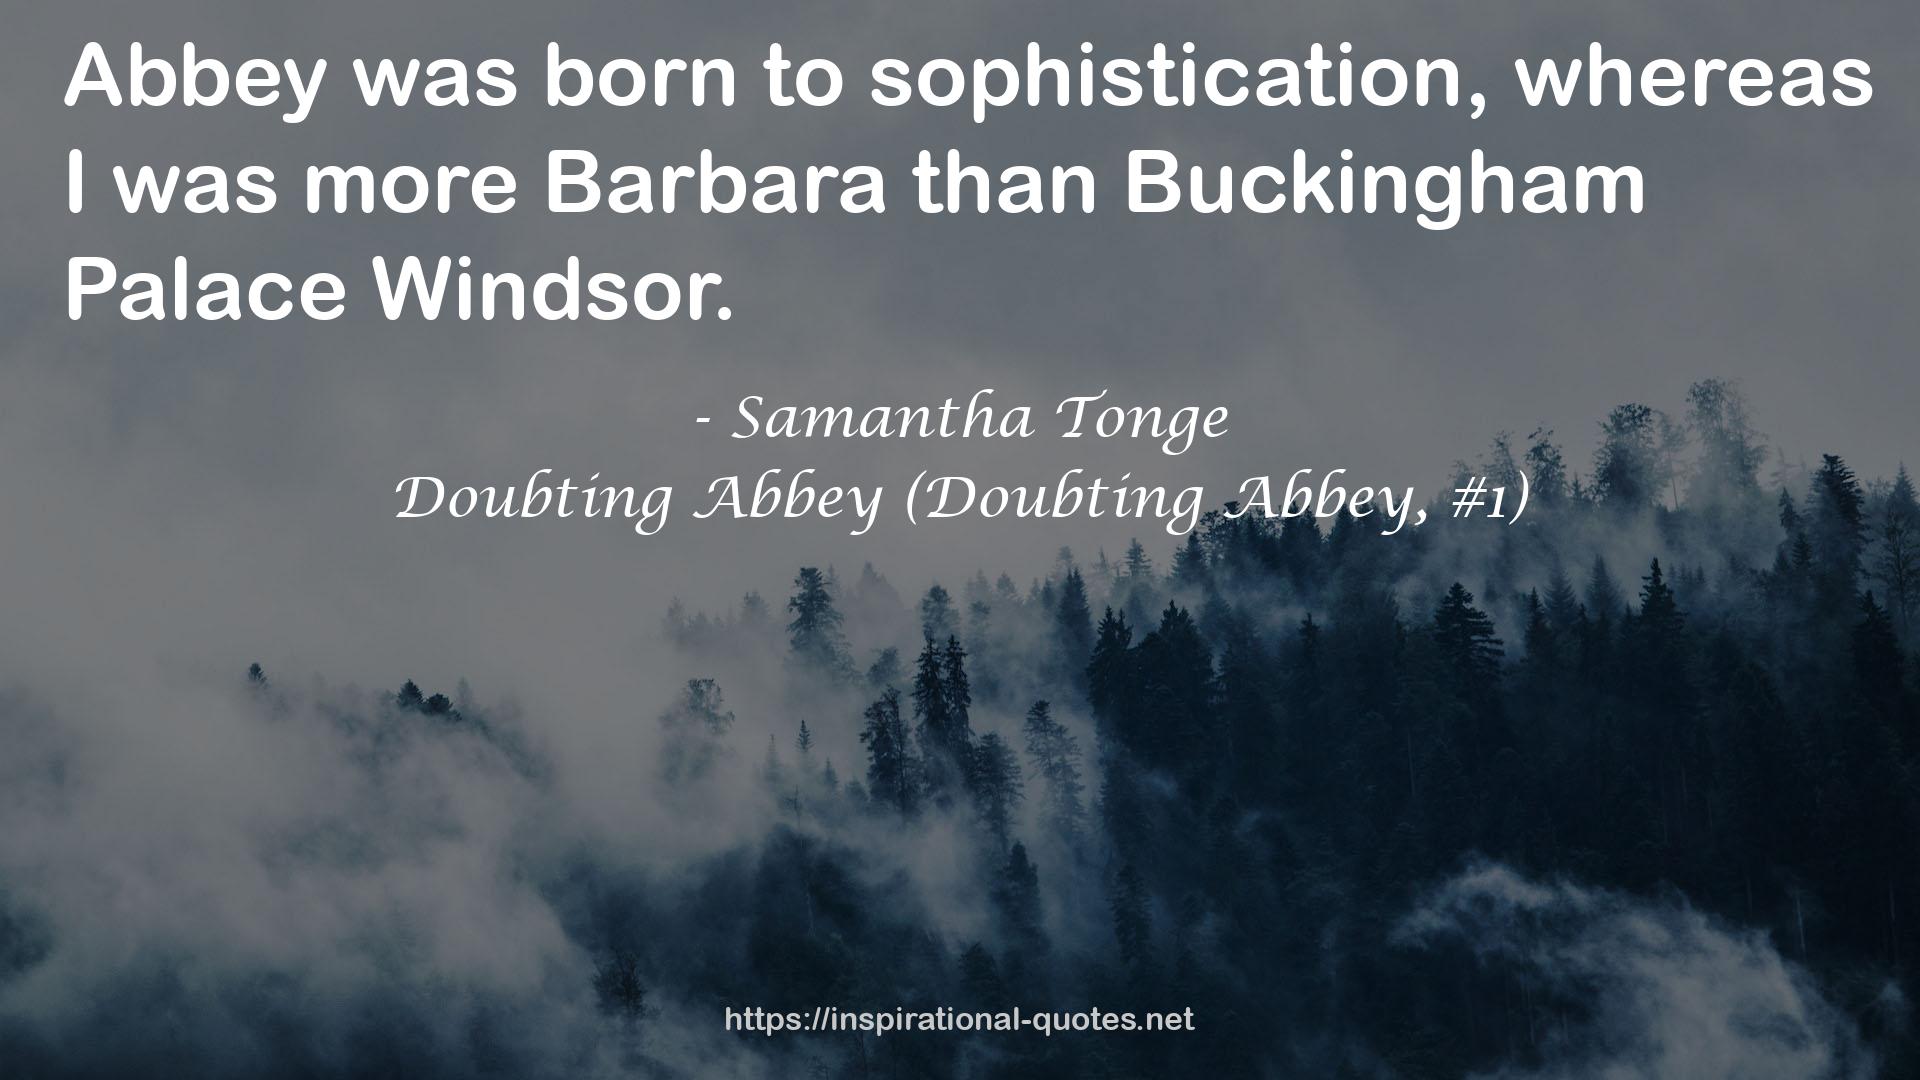 Doubting Abbey (Doubting Abbey, #1) QUOTES